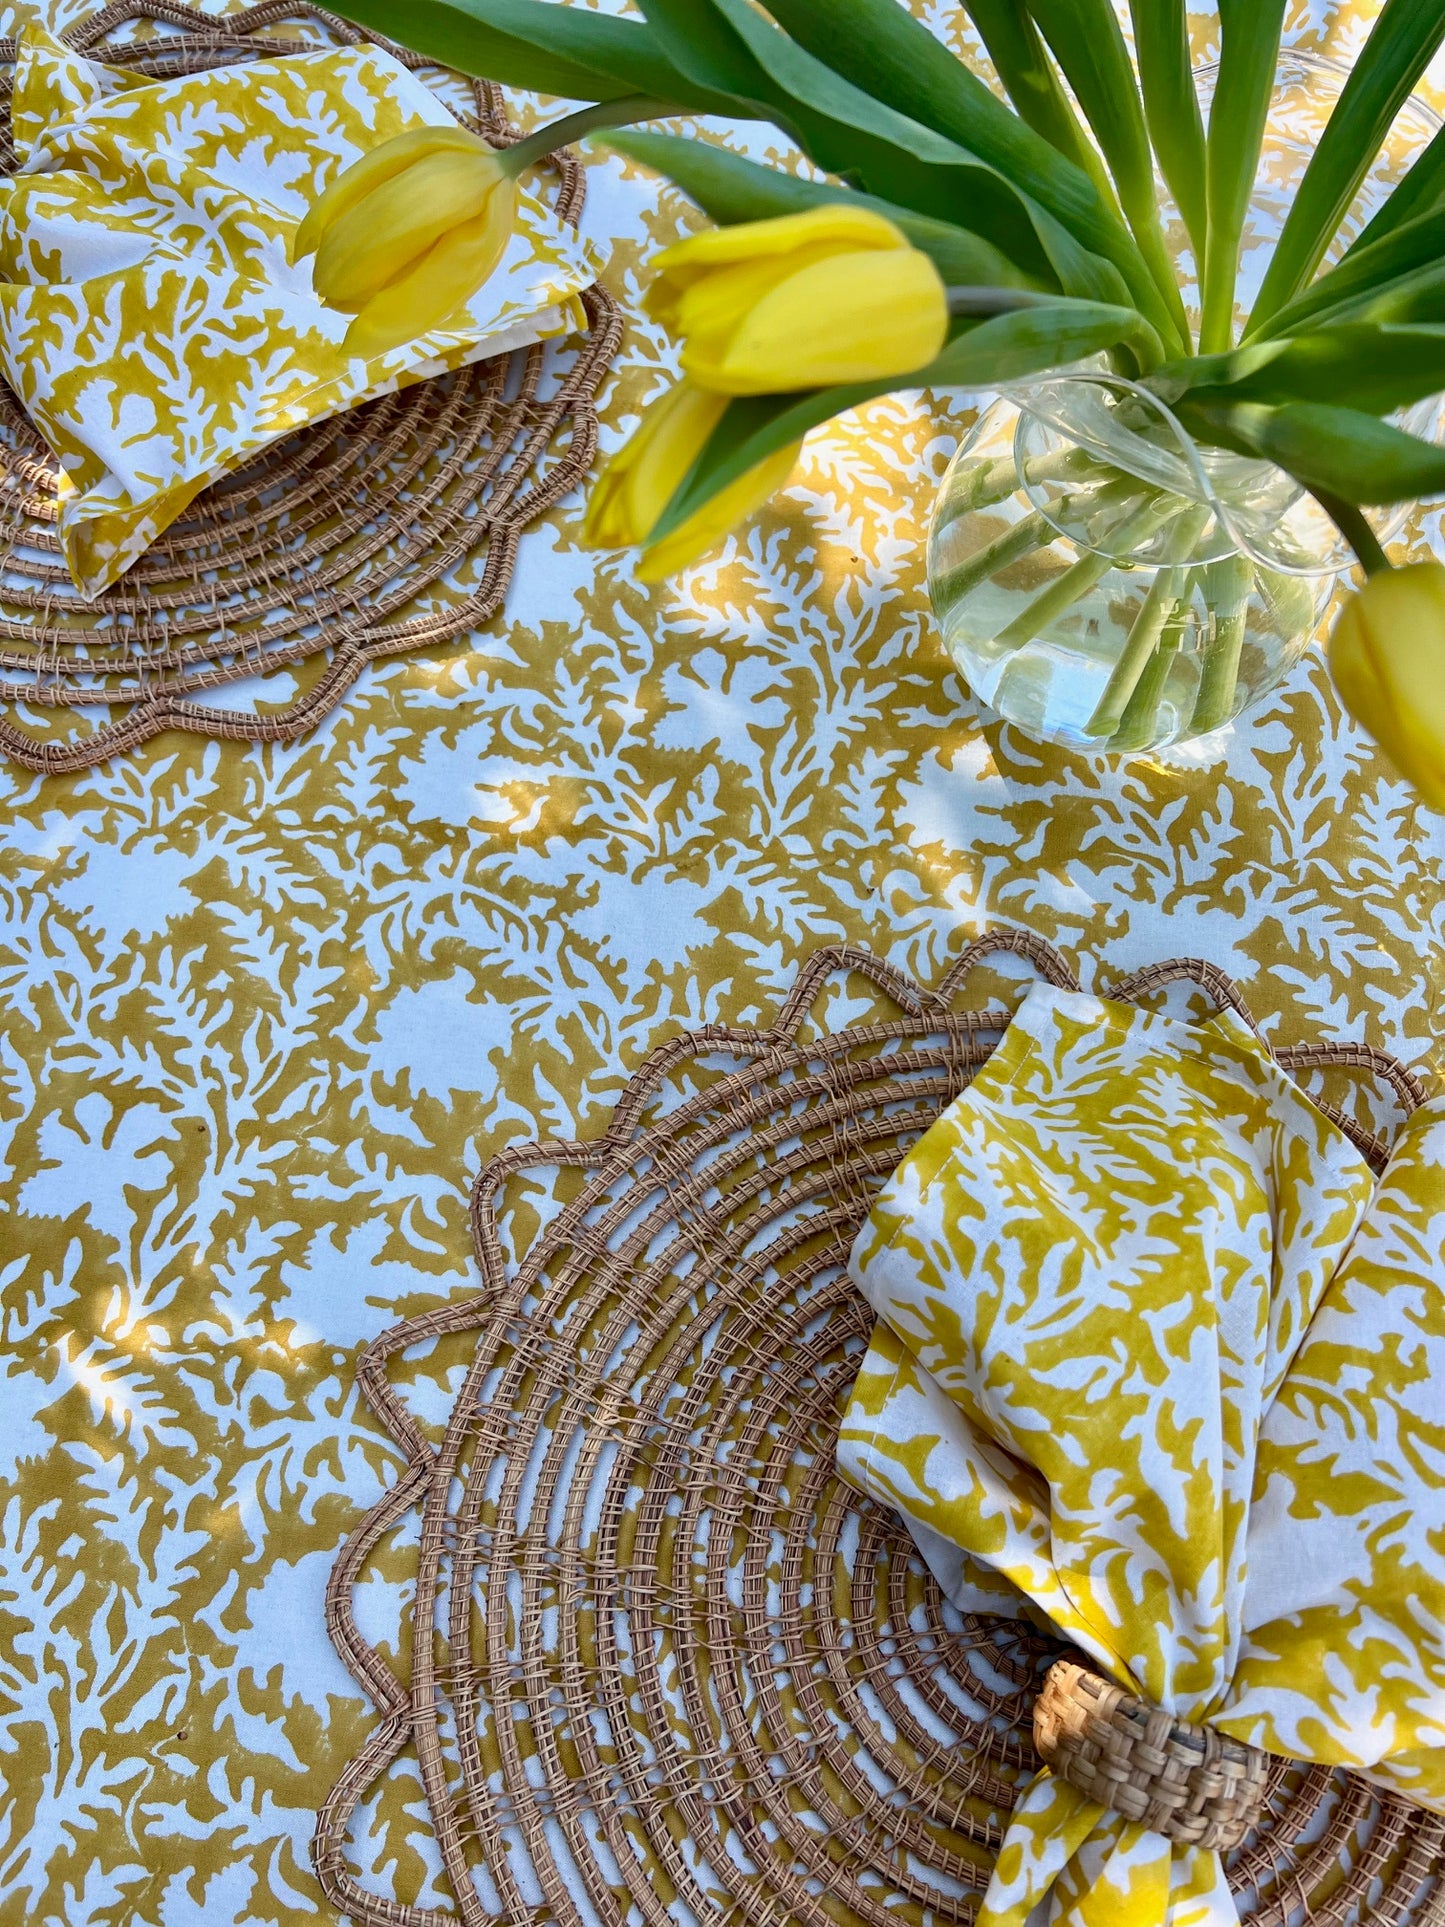 Pressed Florals Tablecloth in Marigold Yellow